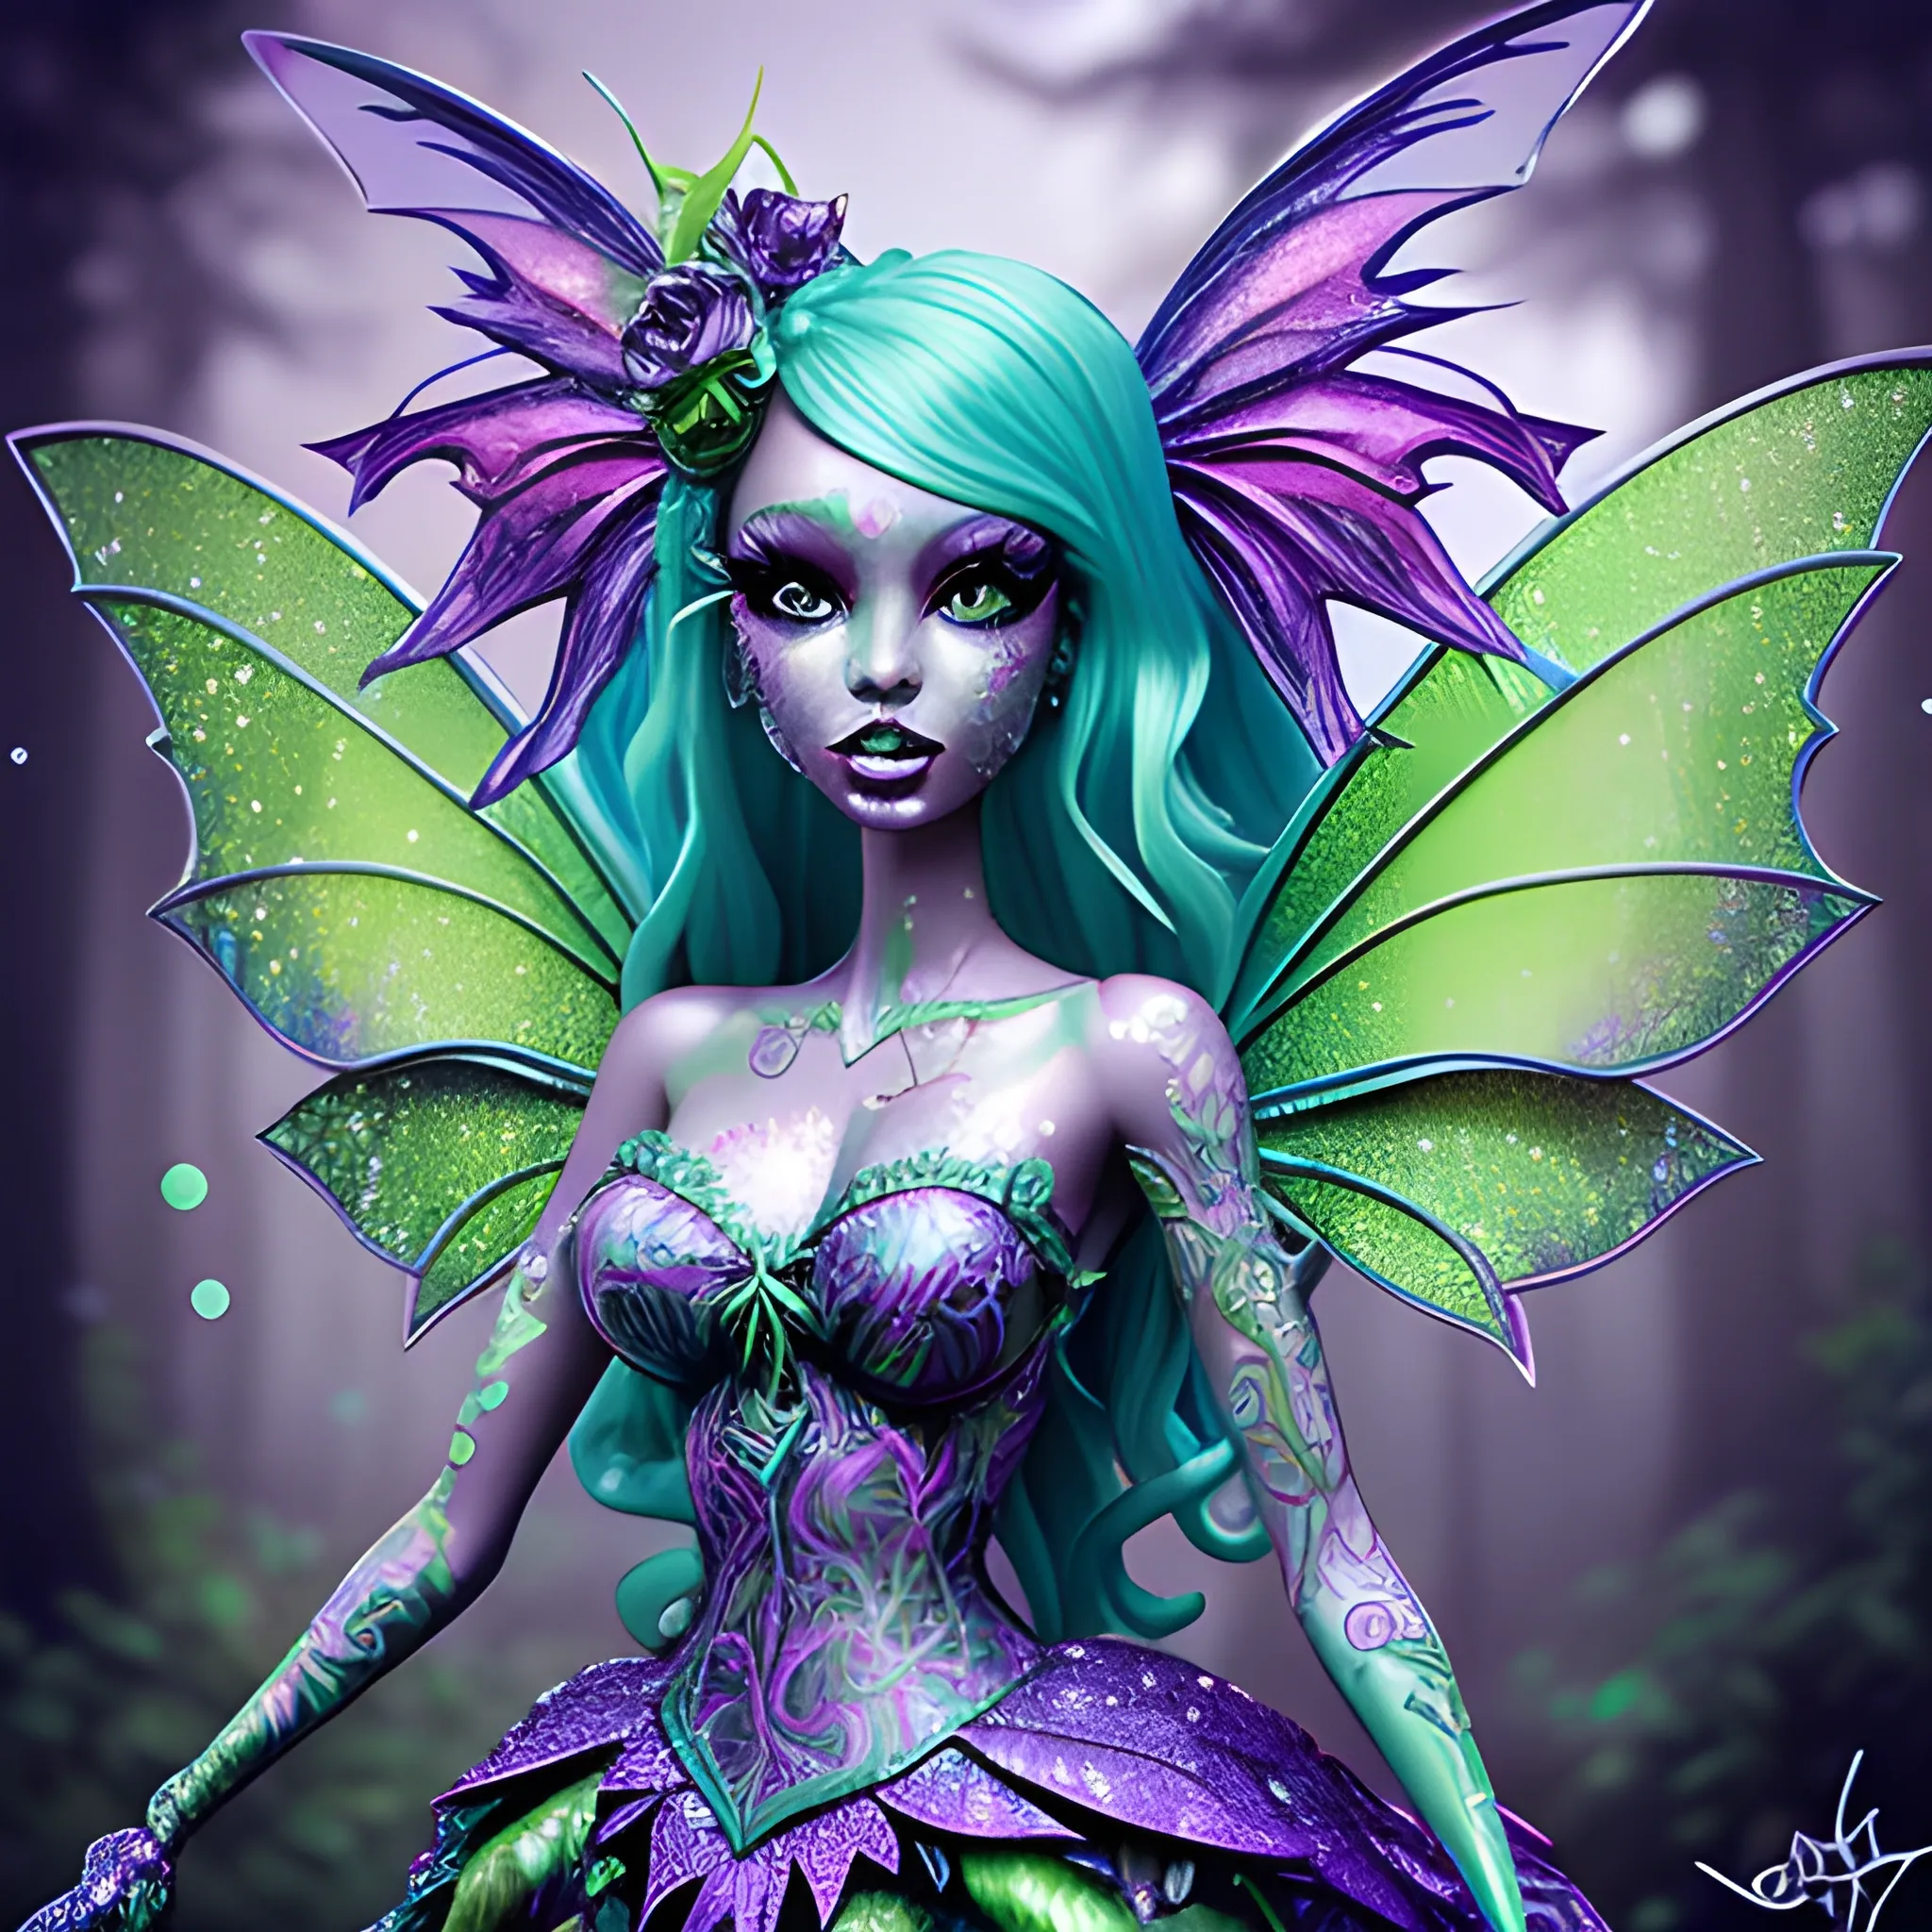  Mythical Fairy: monster High doll: vines: woman: fairy wings: forest: nature: blue and green: detailed: glitter, airbrush, luminous color sparkles; graffiti art, splash art, street art, spray paint, oil gouache melting, acrylic, high contrast, colorful polychromatic, ultra detailed, ultra quality, CGSociety, 3D